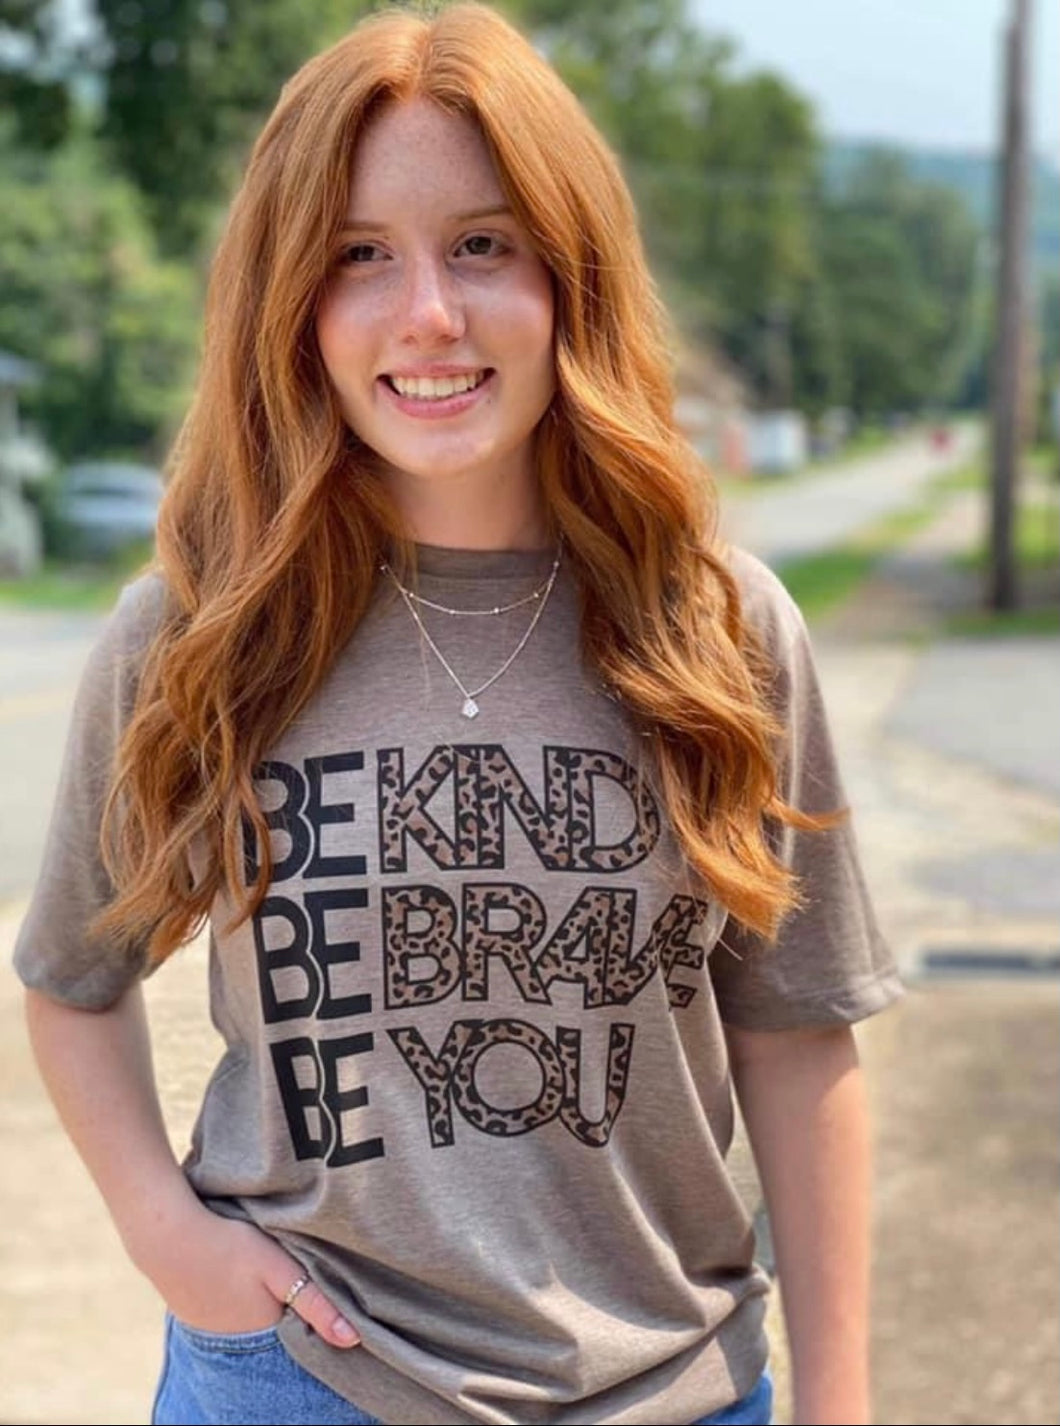 Be Kind, Be Brave, Be You Tee